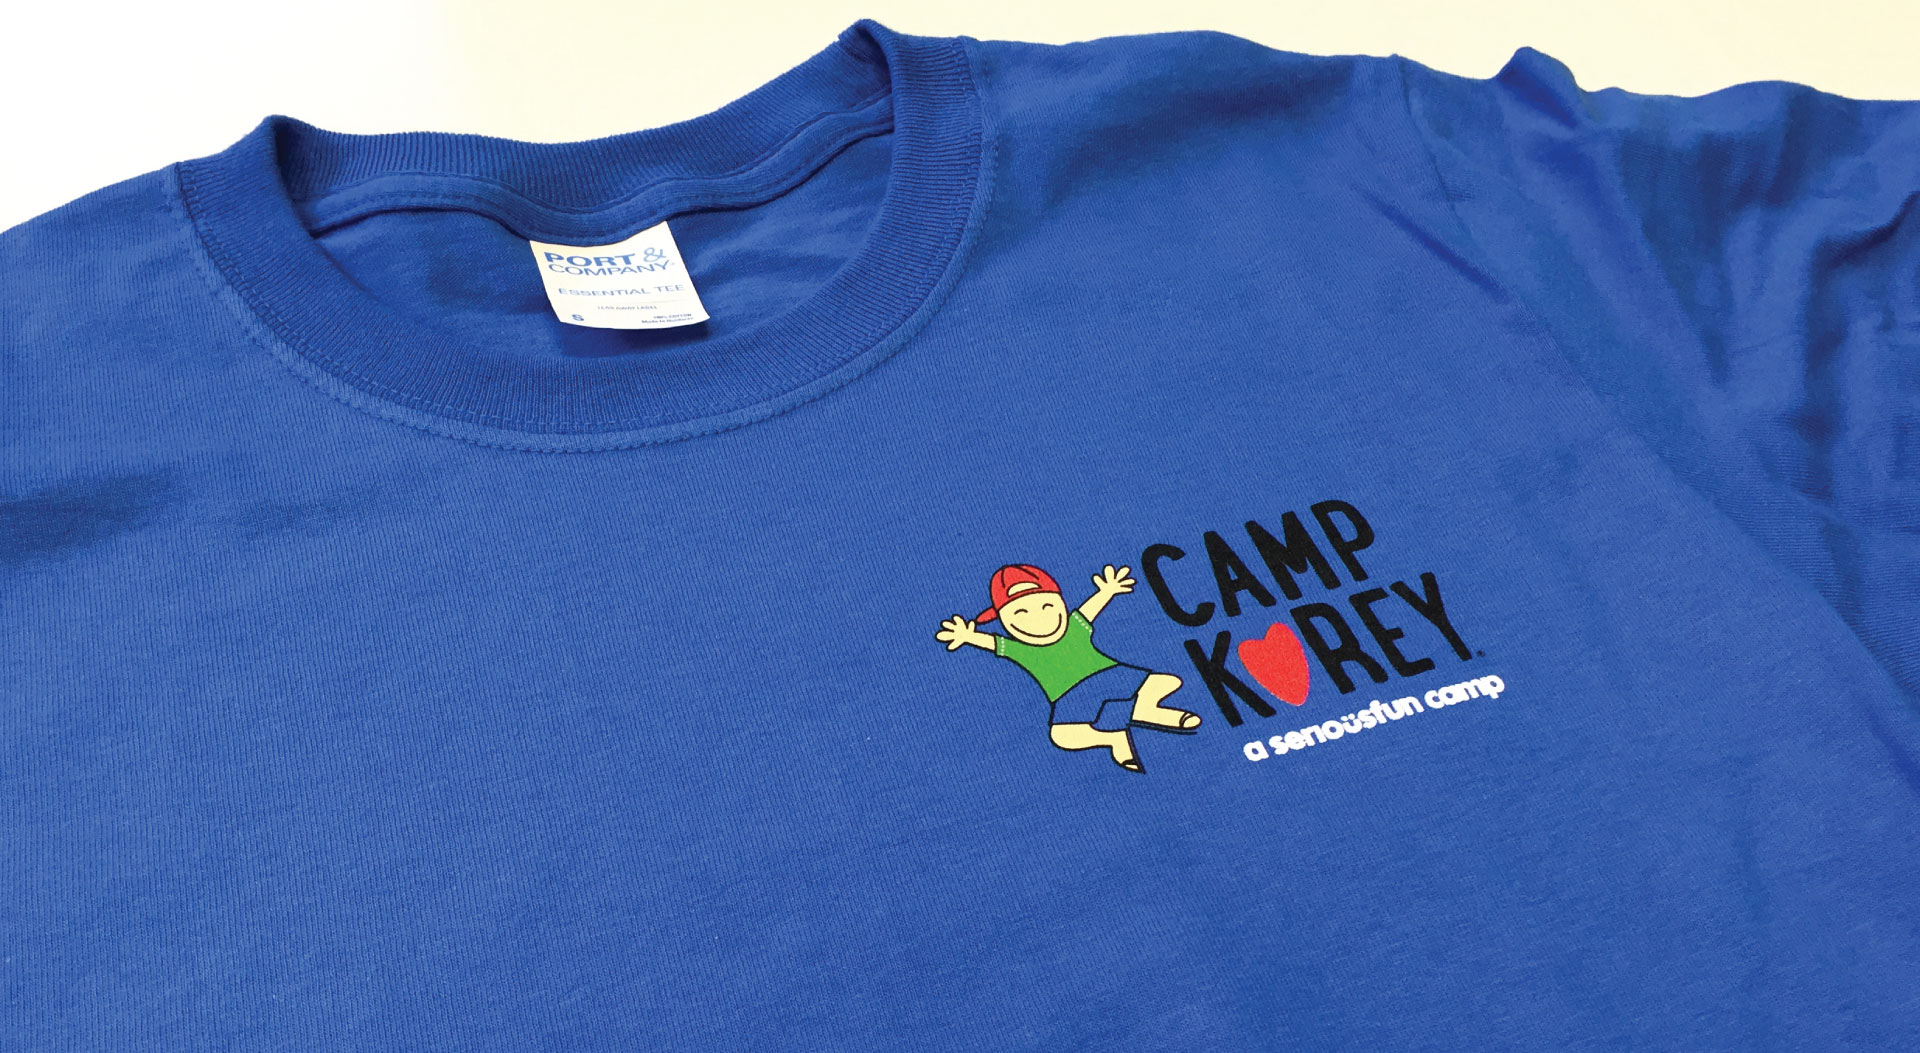 Camp Korey T-Shirt screen printed by Ontra Marketing Group